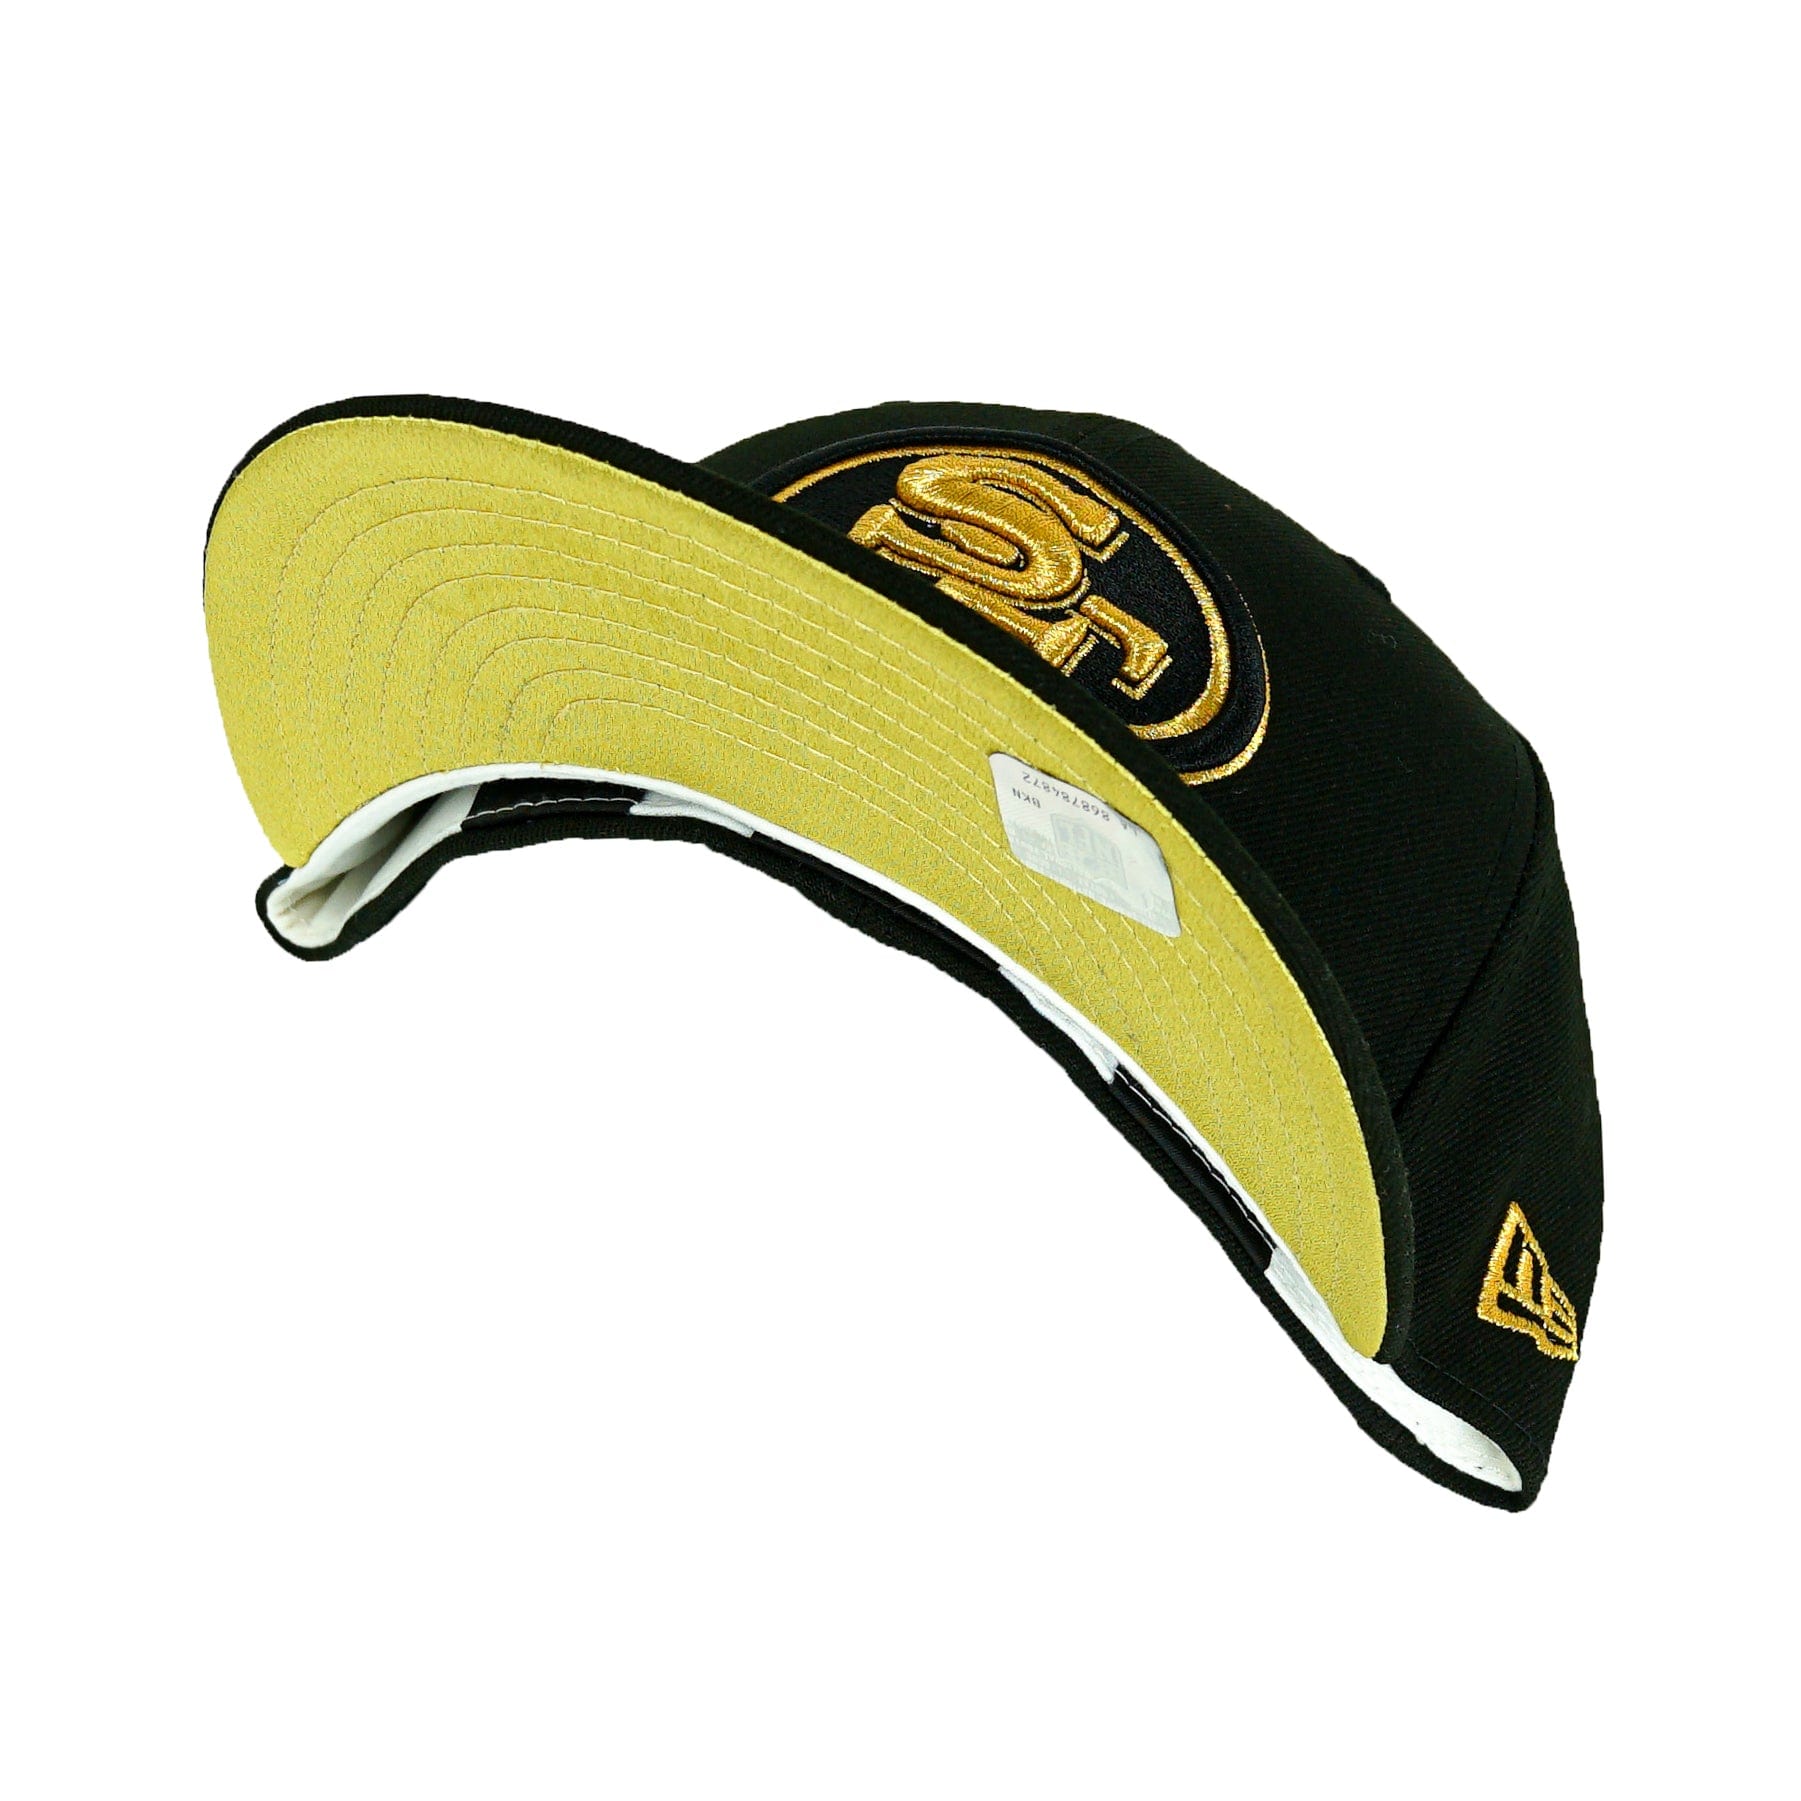 San Francisco 49ers 59Fifty Fitted Hat in black and gold